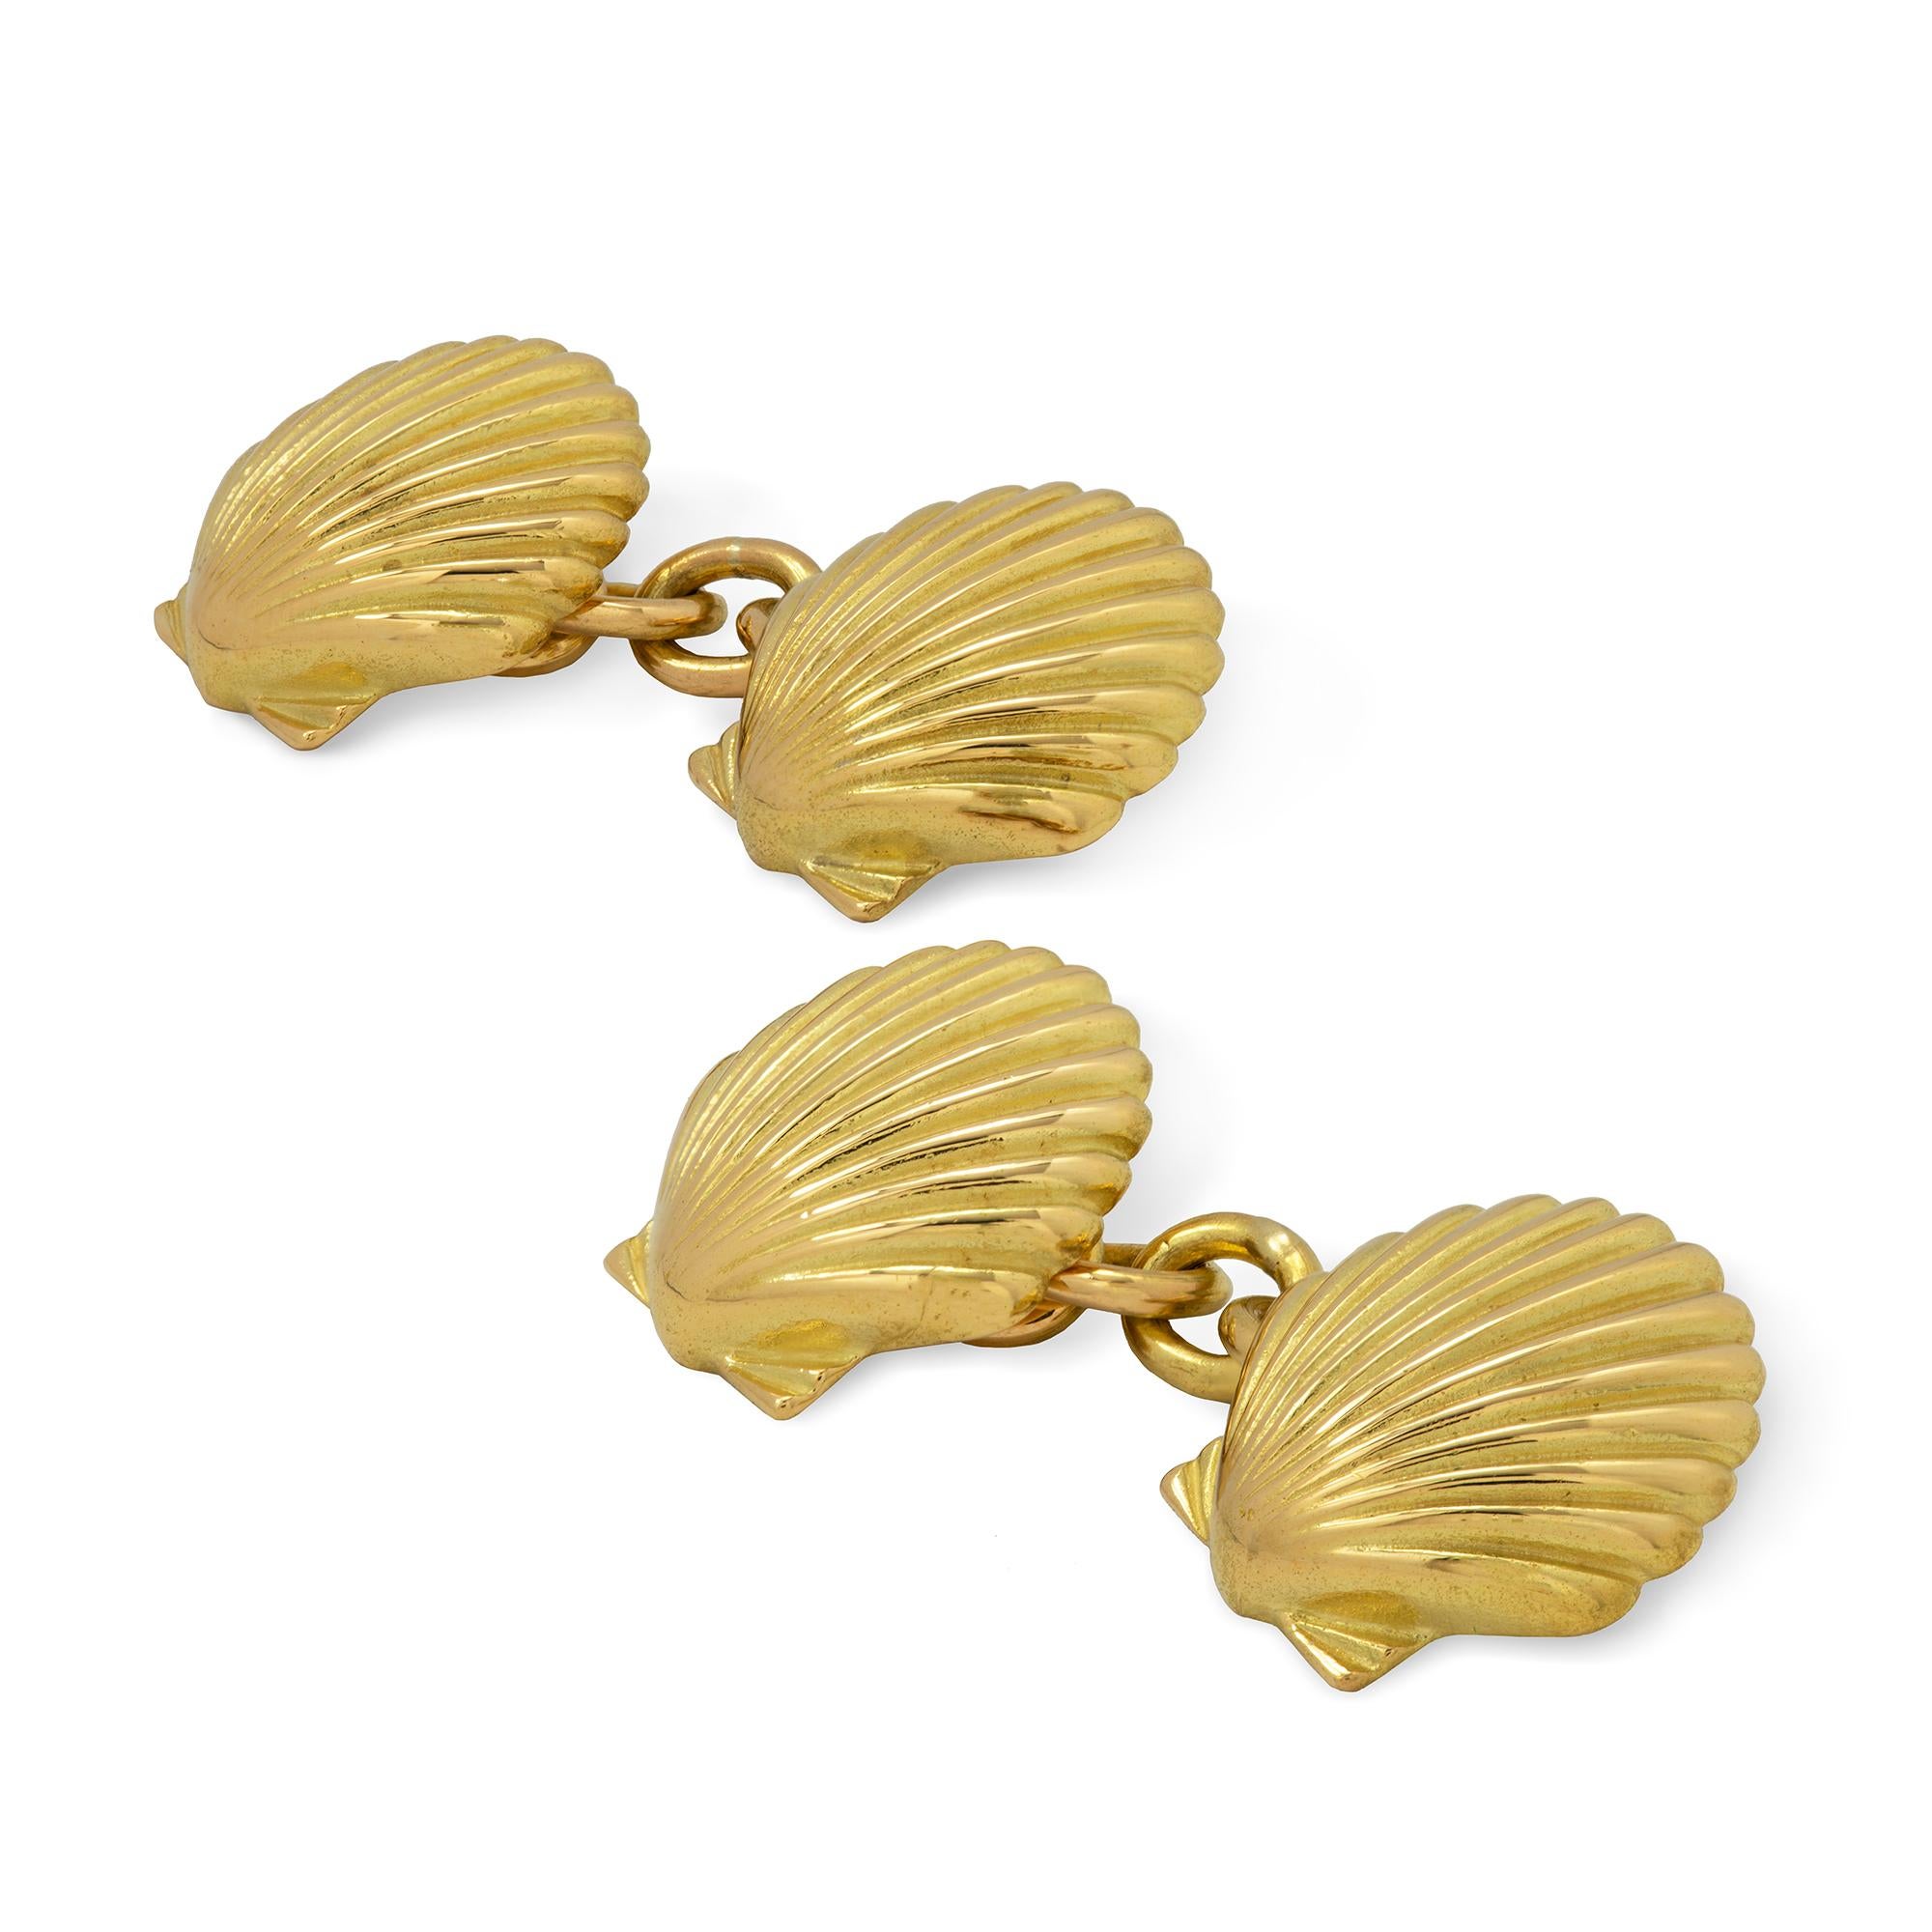 A pair of yellow gold shell cufflinks, each with two solid gold carved shells with chain link connections between, later  hallmarked 18ct gold London 2018, bearing the Bentley& Skinner sponsor mark, measuring approximately 1.3cm in diameter, gross